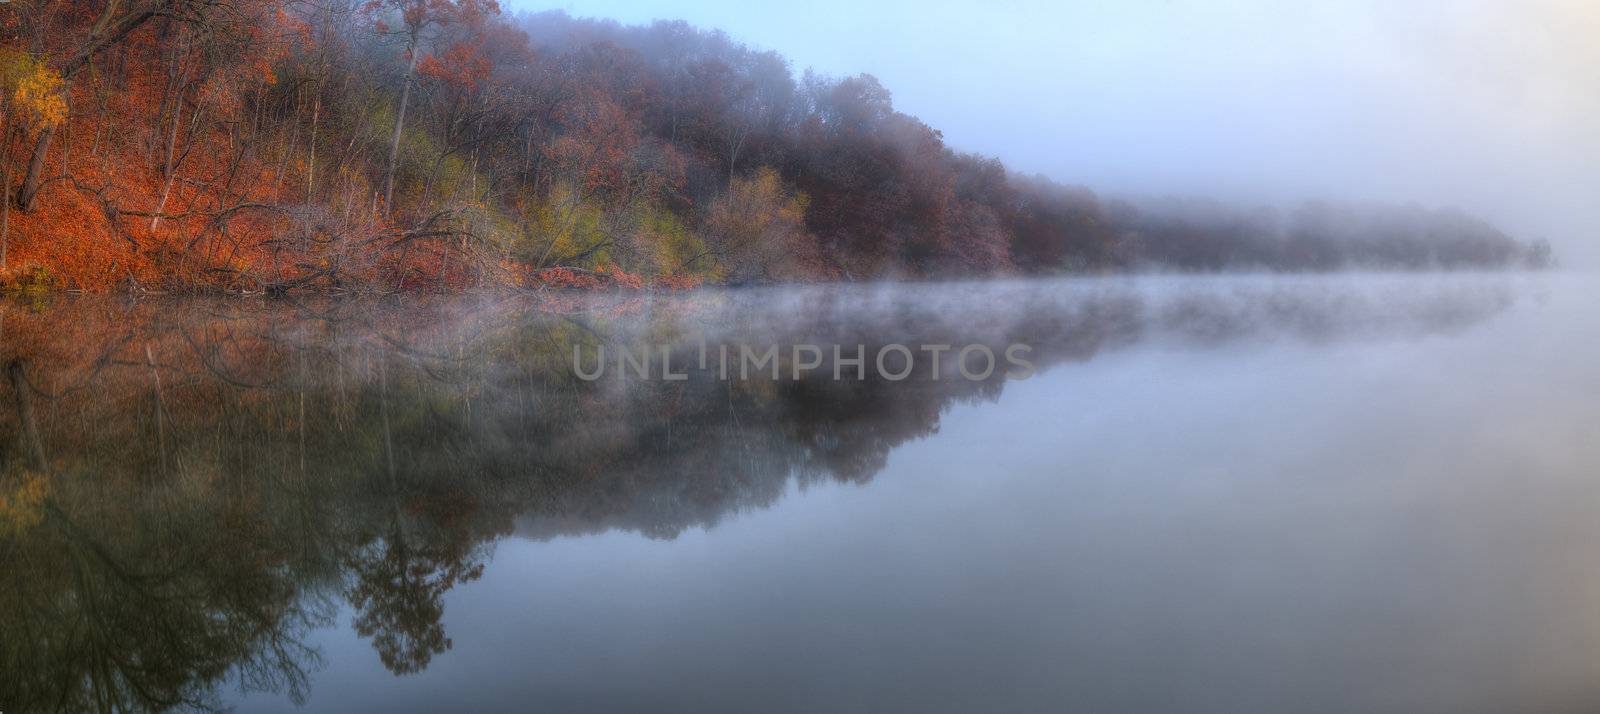 Foggy River Bank Foliage in HDR by Coffee999